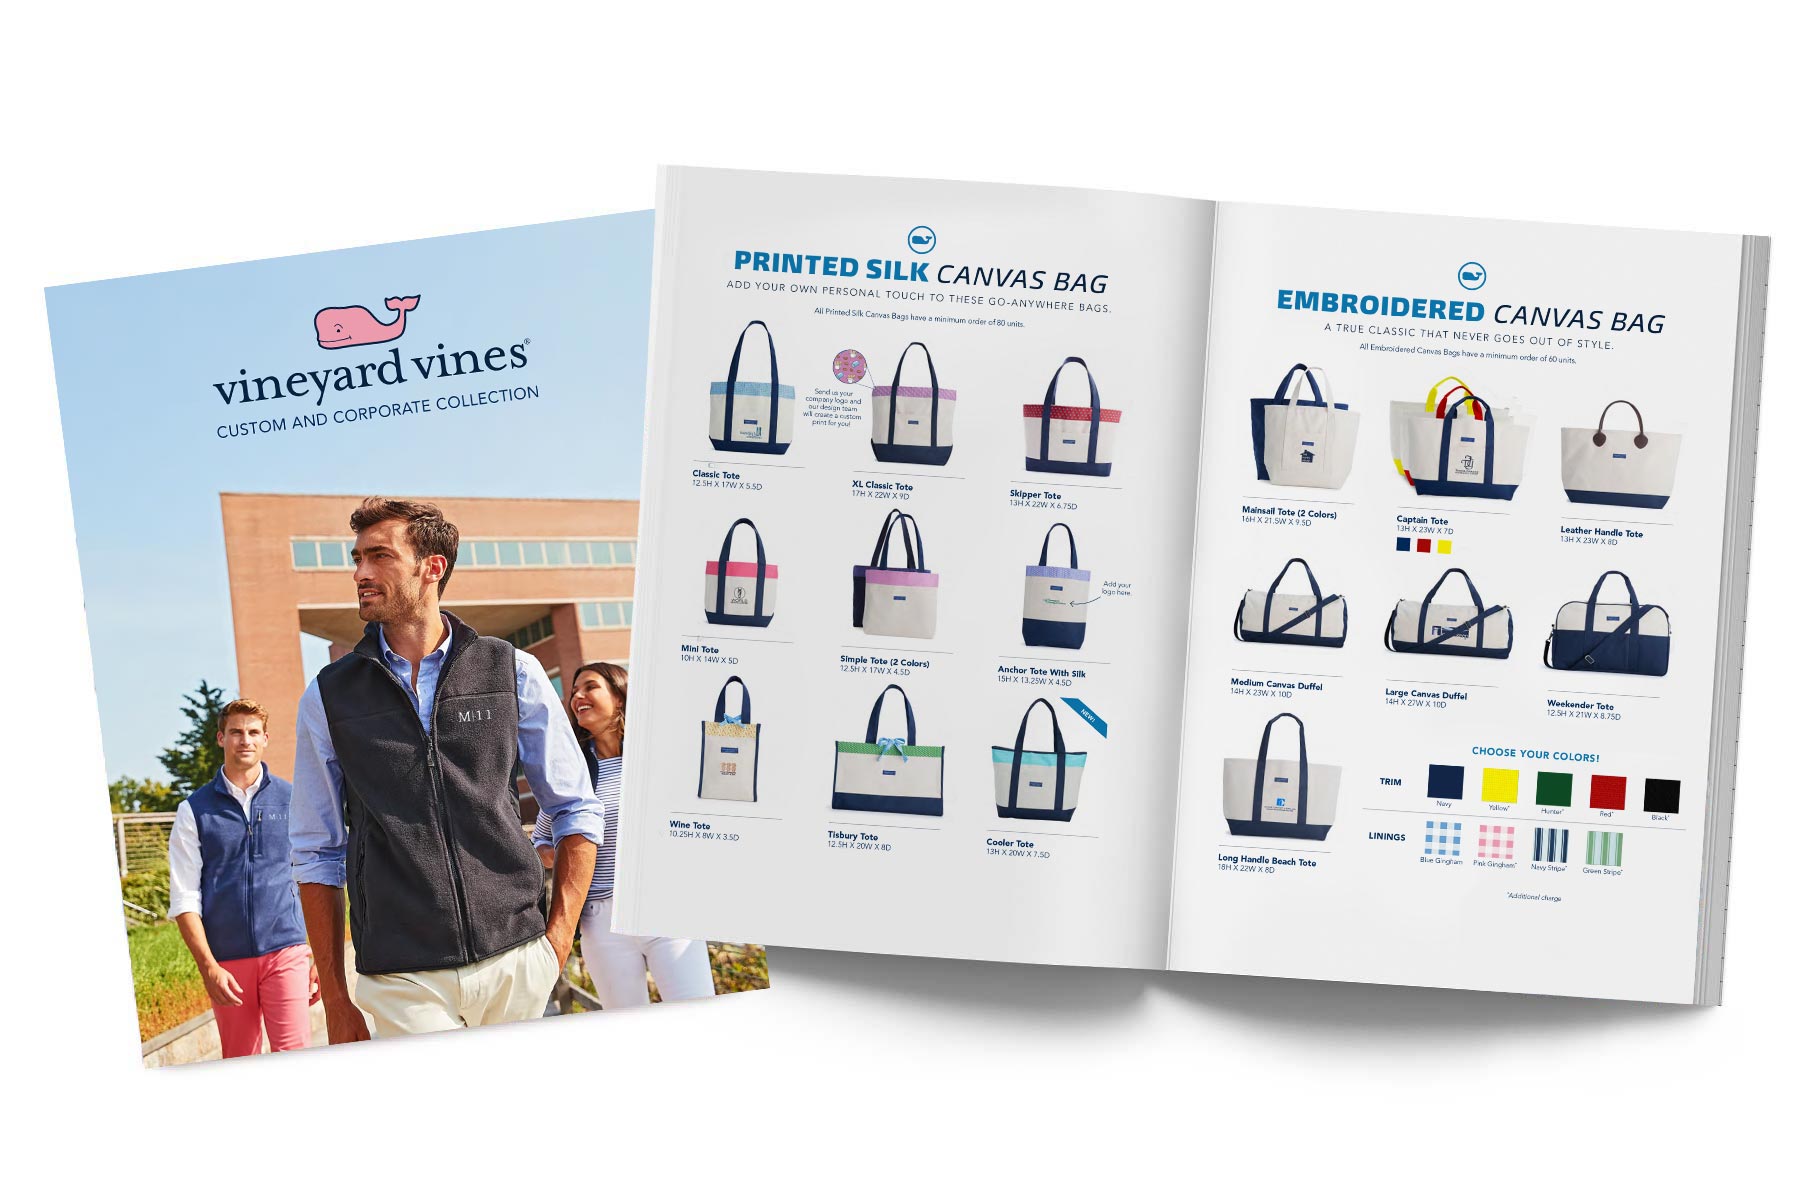 vineyard vines Custom and Corporate Collection catalog.